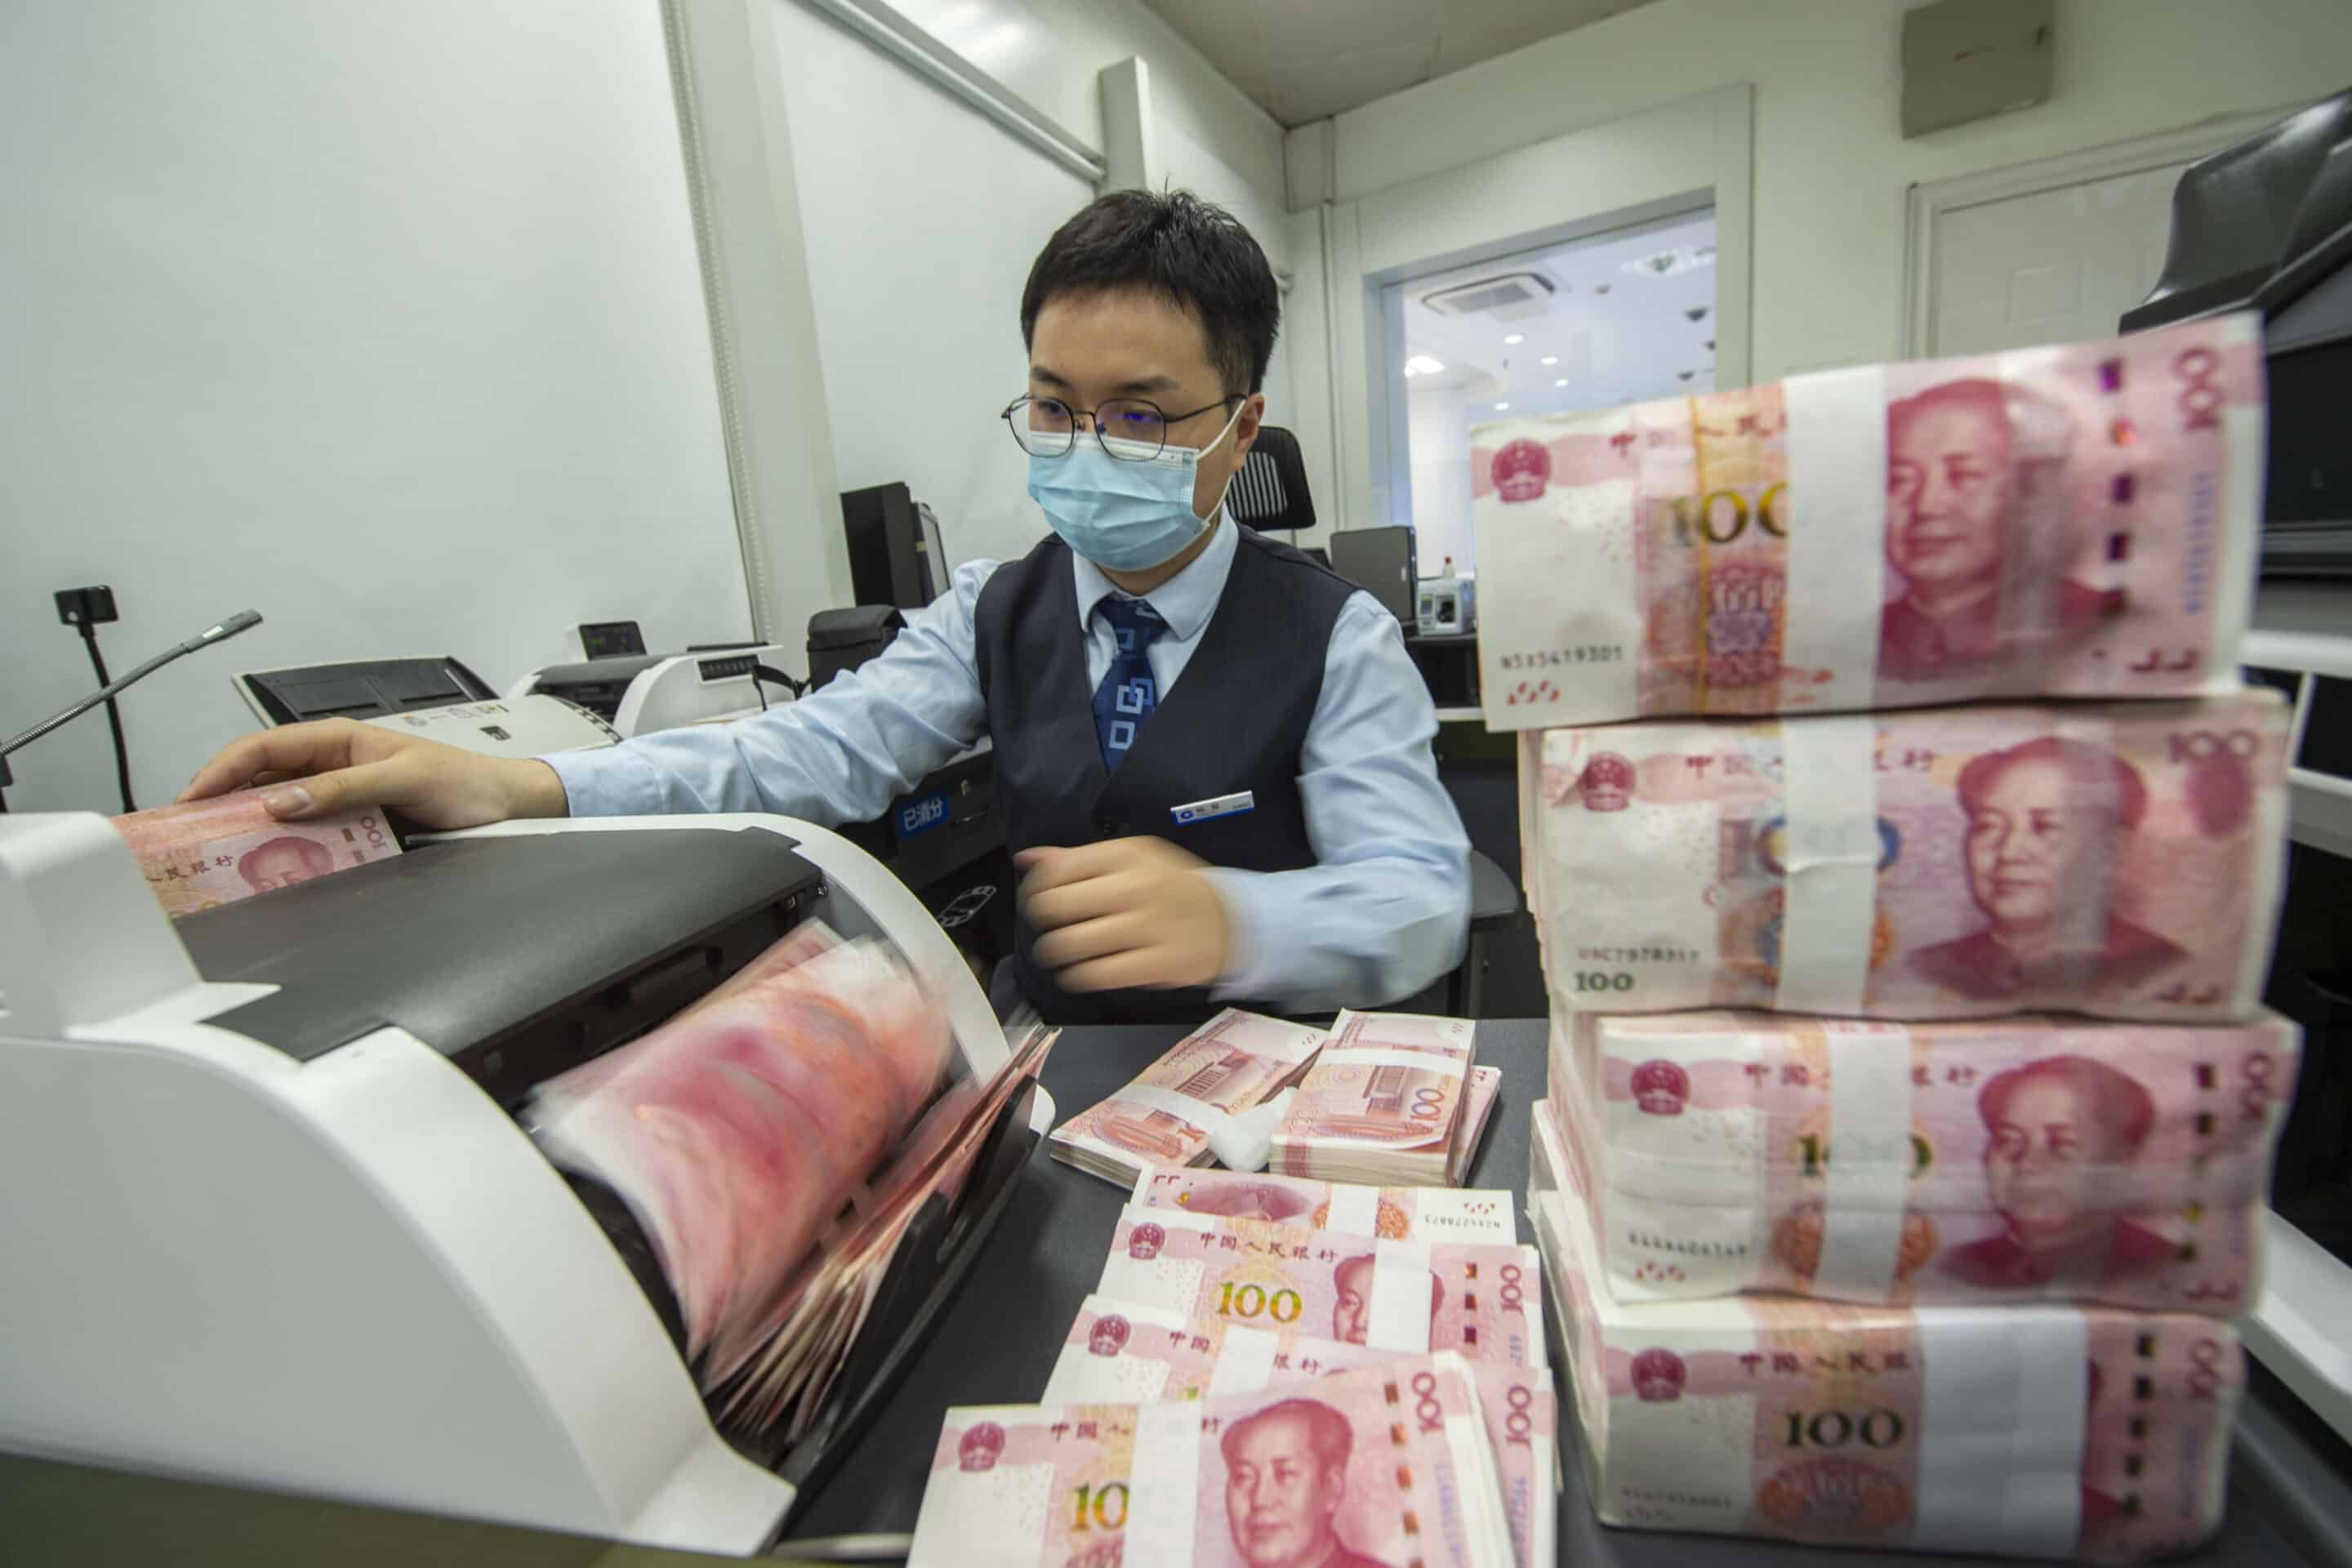 HAIAN, CHINA - MAY 15, 2022 - A staff member counts renminbi(RMB)  at a bank in Haian, Nantong city, East China's Jiangsu province, May 15, 2022. According to the People's Bank of China (PBOC), the INTERNATIONAL Monetary Fund (IMF) Executive Board unanimously raised the weighting of the RENMINBI (RMB) from 10.92 percent to 12.28 percent after completing its quennial review of the valuation of Special Drawing Rights (SDR), up 1.36 percentage points. (Photo by CFOTO/Sipa USA)/39301948//2205151535